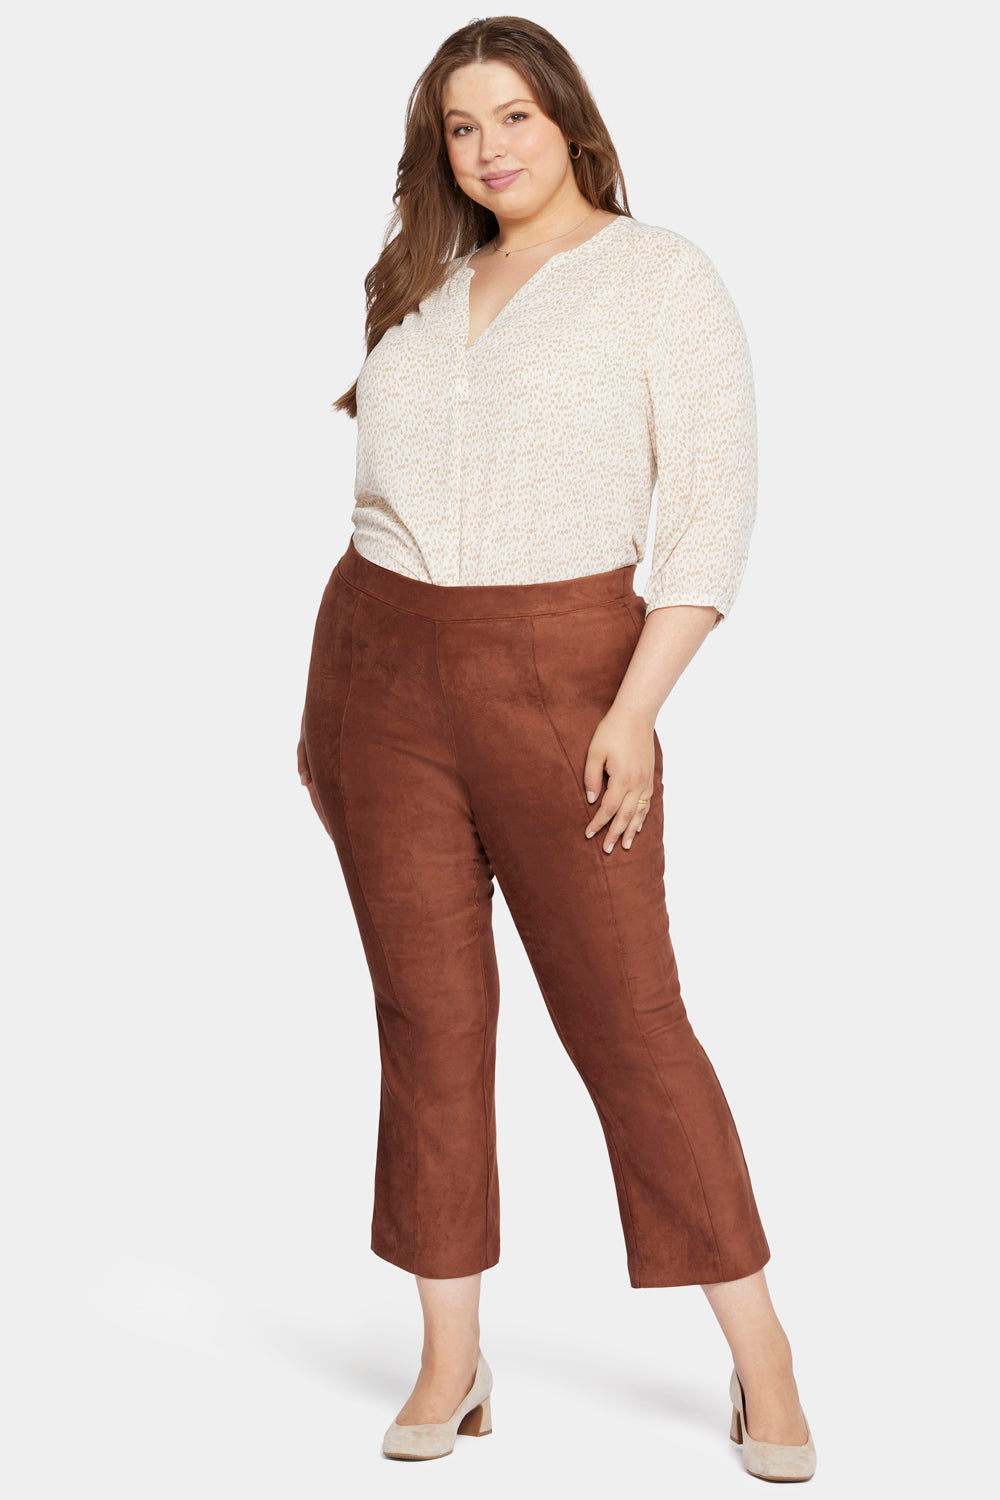 NEW A New Day Women's High Rise Vegan Leather Pants Dusty Fig Brown Plus  Size 14